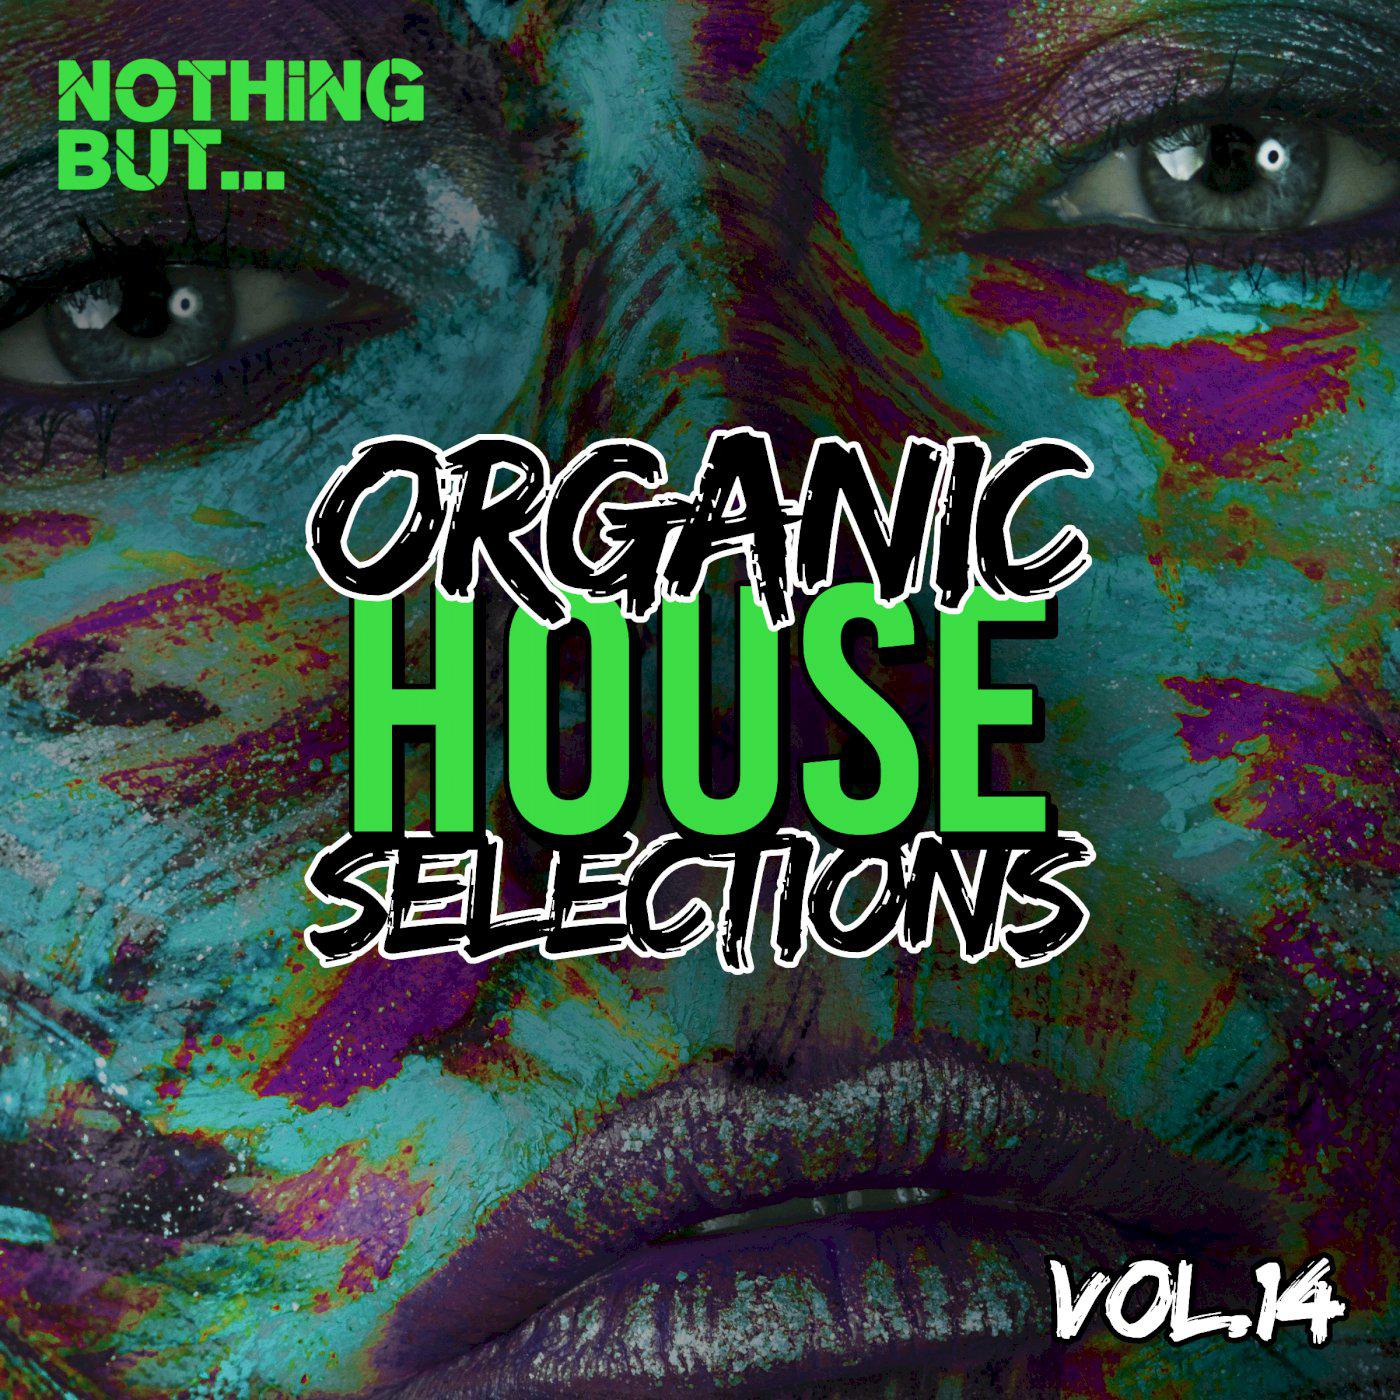 Постер альбома Nothing But... Organic House Selections, Vol. 14